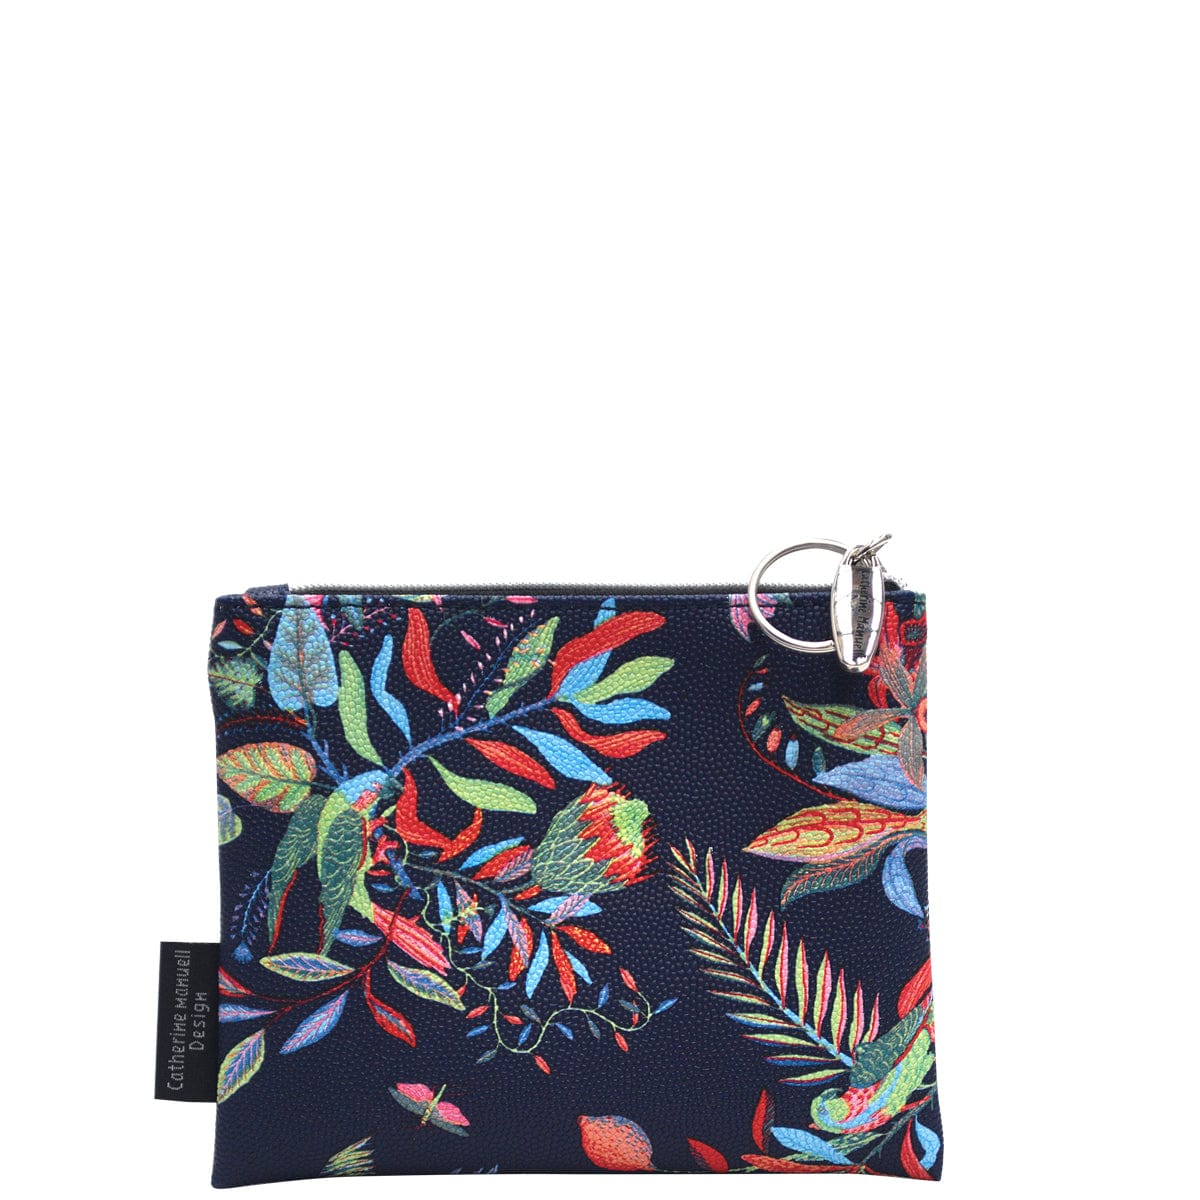 Everyday Purse - Navy Parrots - 20% off